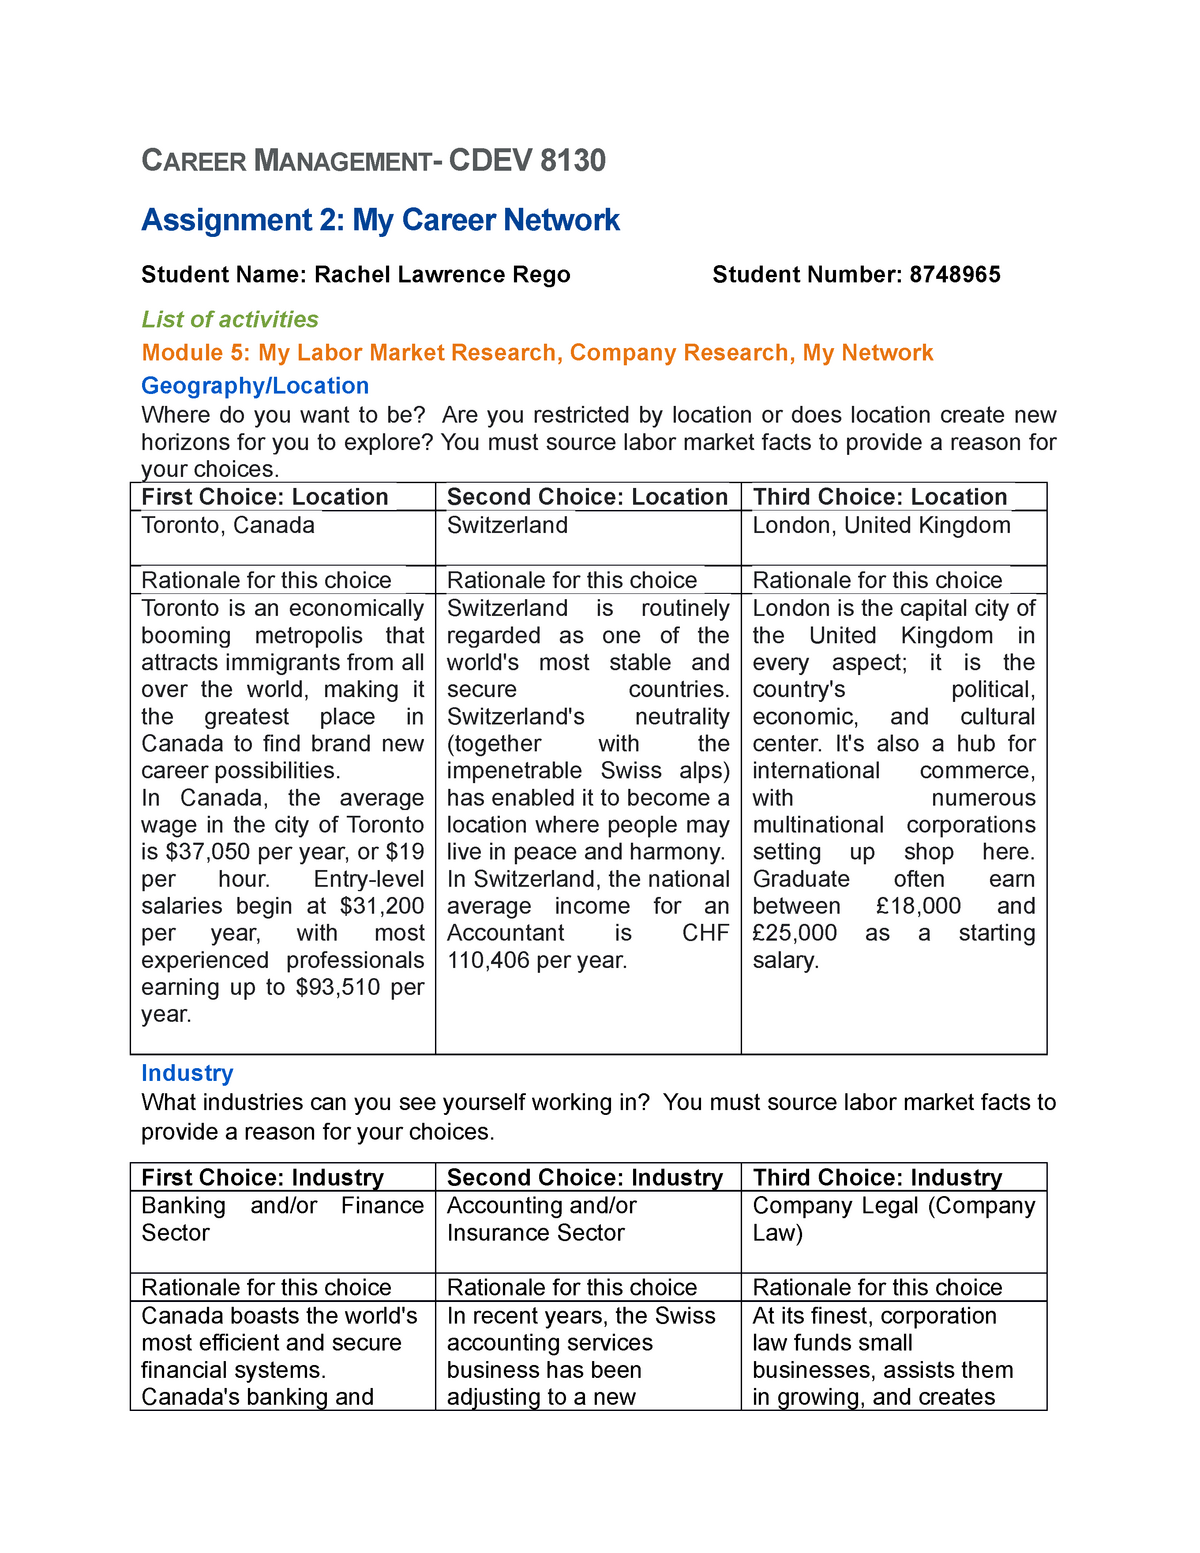 assignment 2 my career network